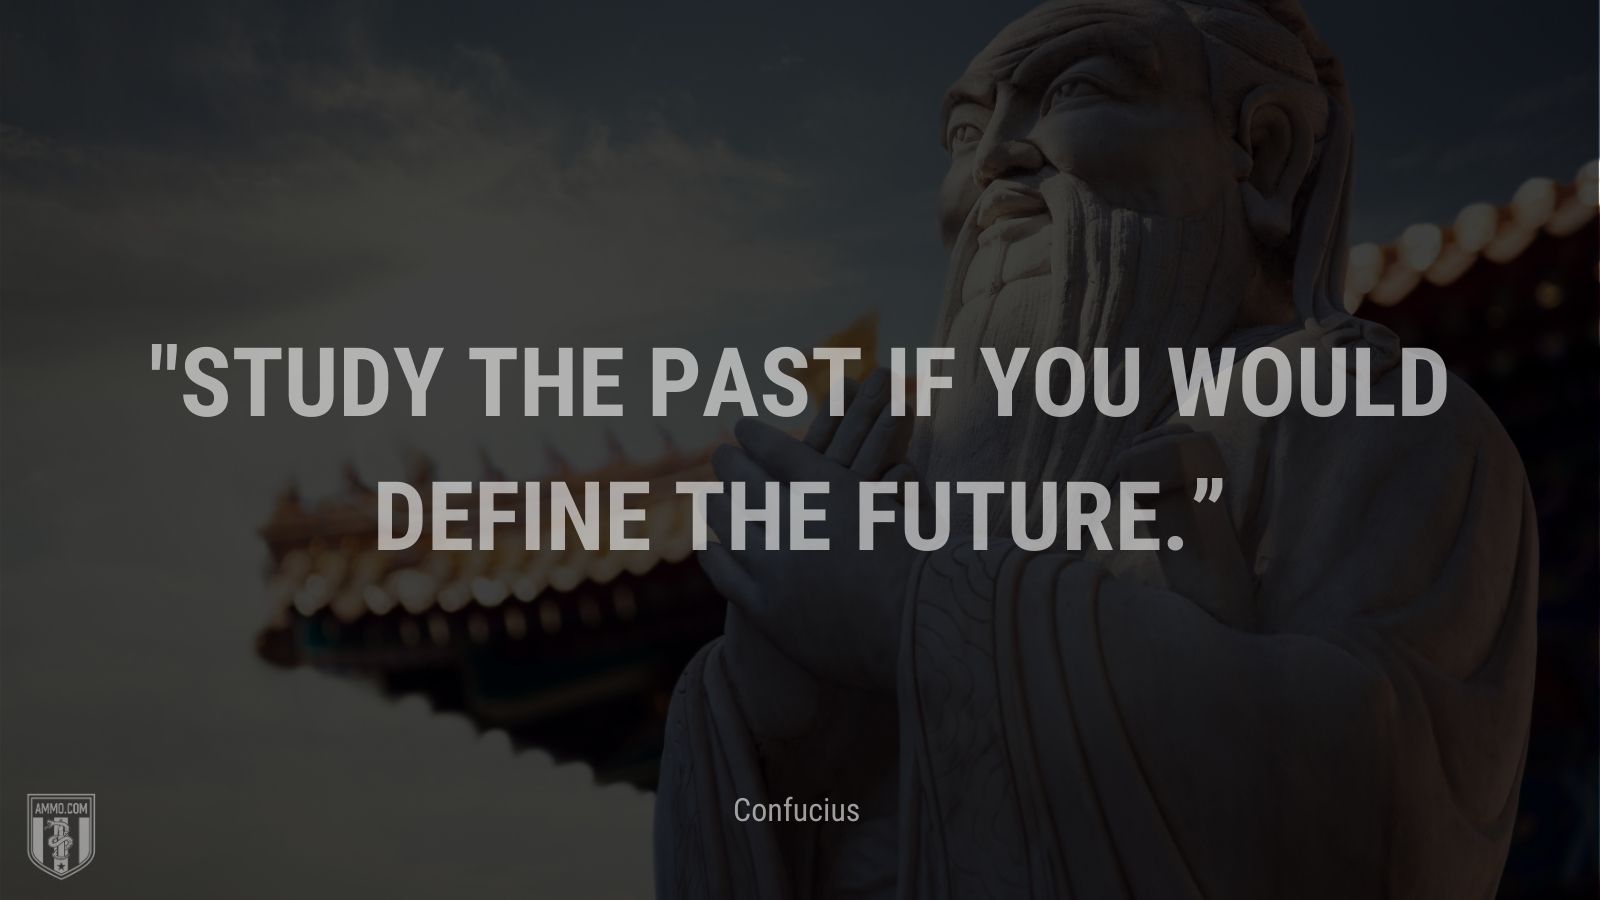 “Study the past if you would define the future.” - Confucius